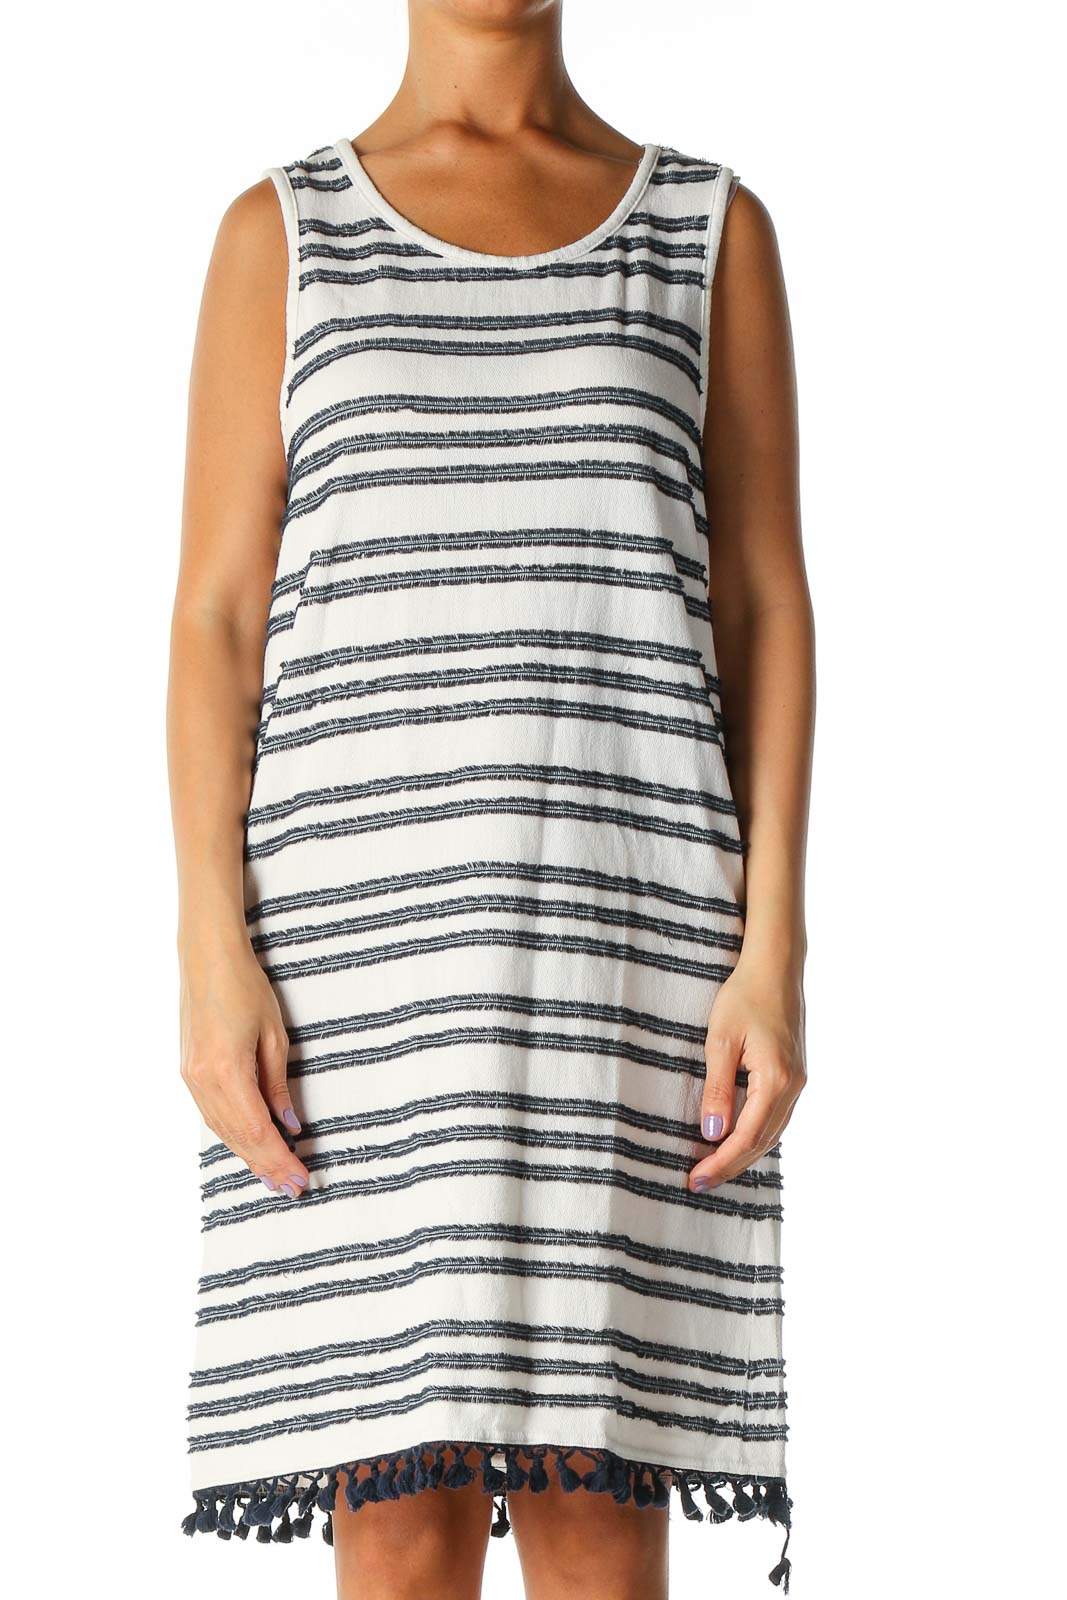 White Striped Casual Shift Dress Front